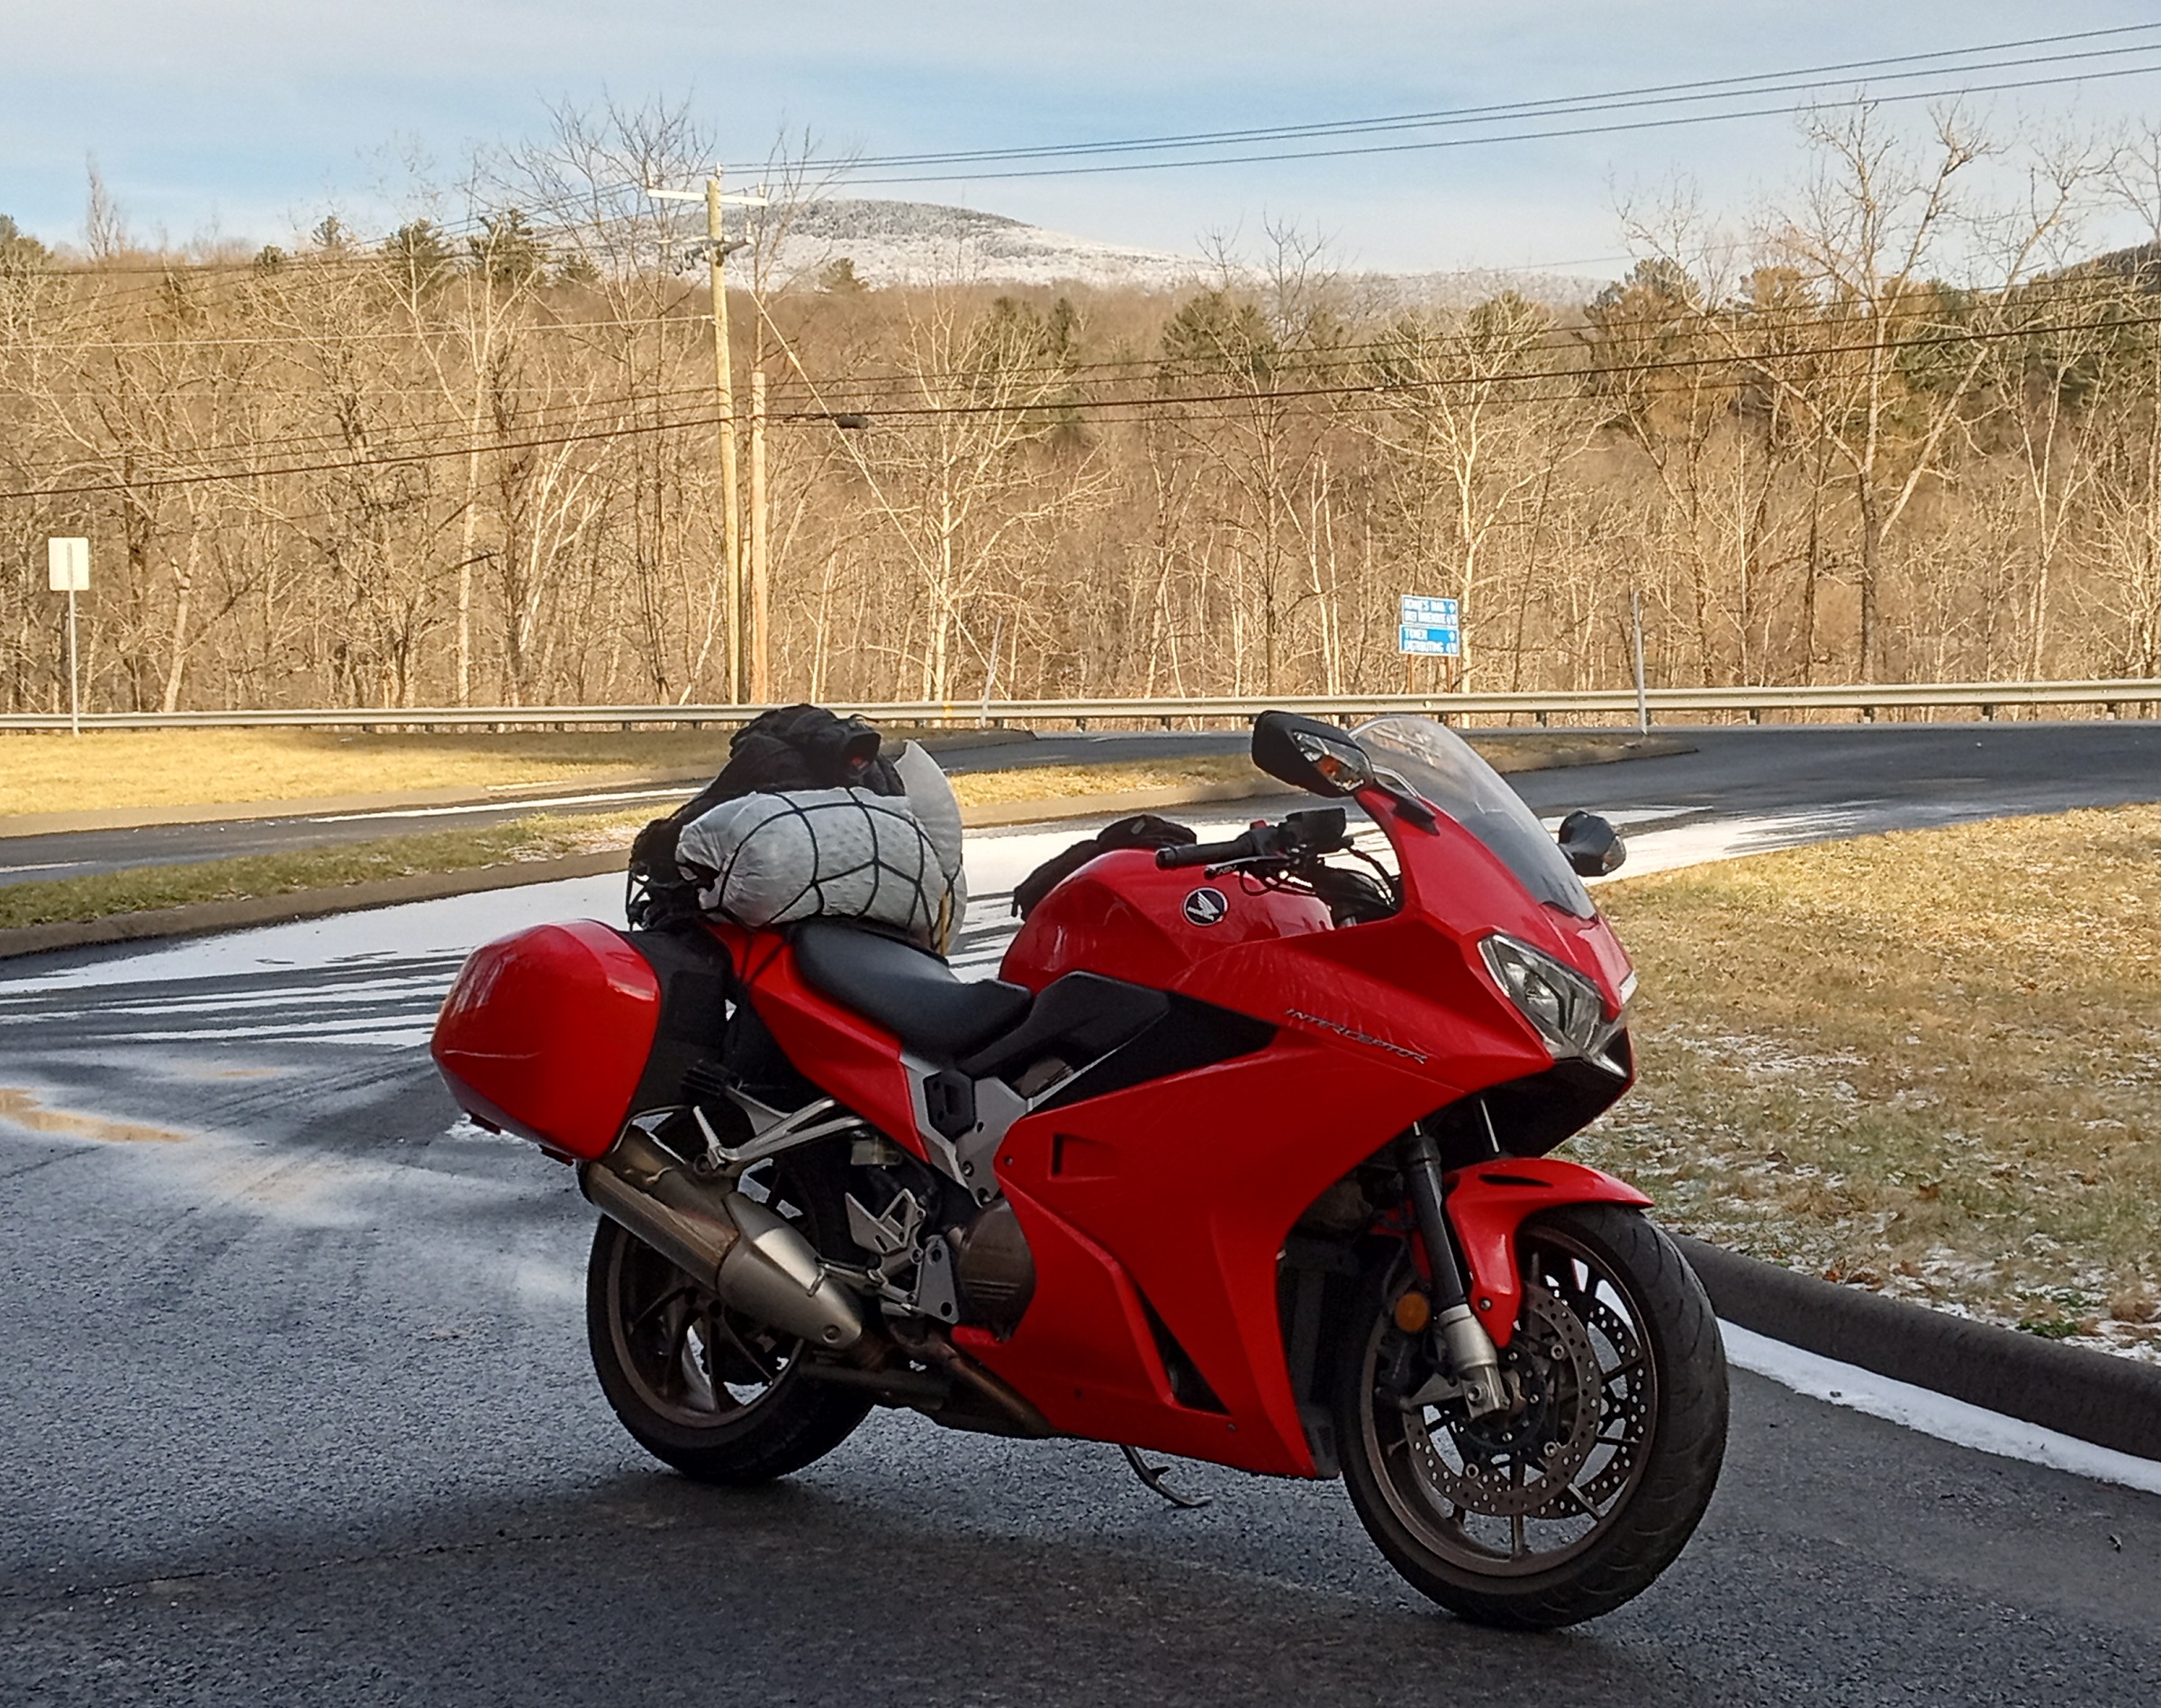 Honda VFR800 parked at a pull off with frosty Mount Greylock in the distance